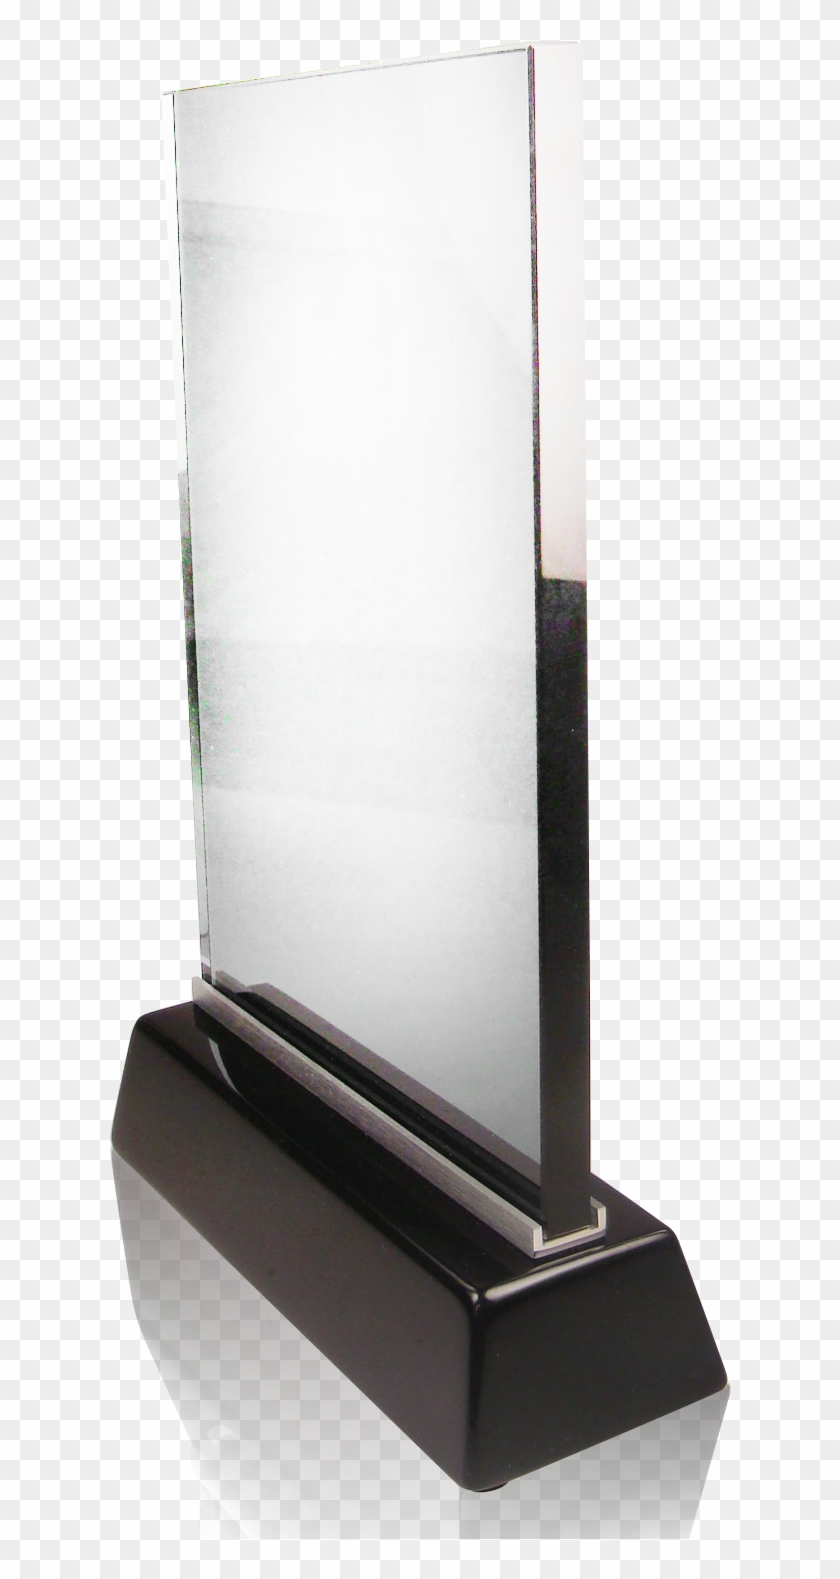 Glass Panel Png Transparent Image - Transparency Clipart